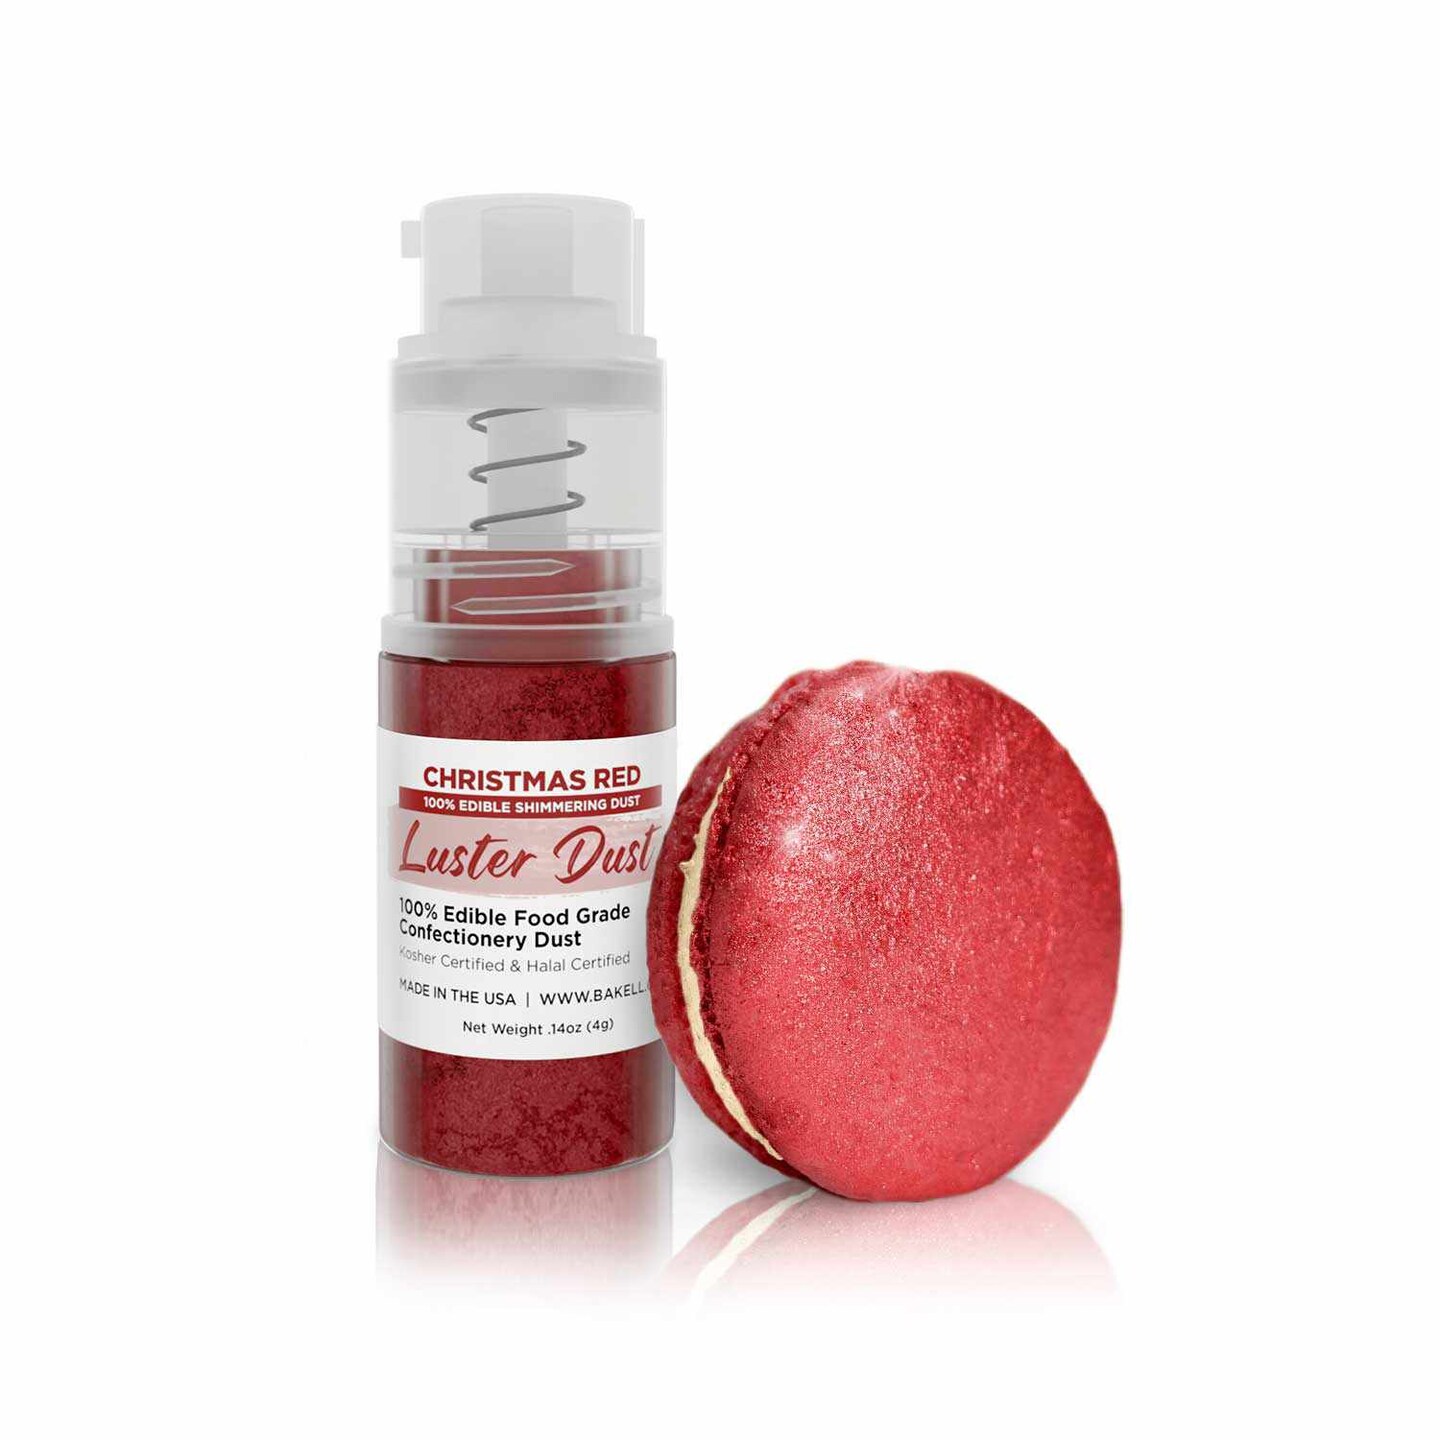 Christmas Red Luster Dust Spray, Luster Dust Edible Glitter Spray Dust for  Cakes, Cookies, Desserts, Paint. FDA Compliant (4 Gram Pump)